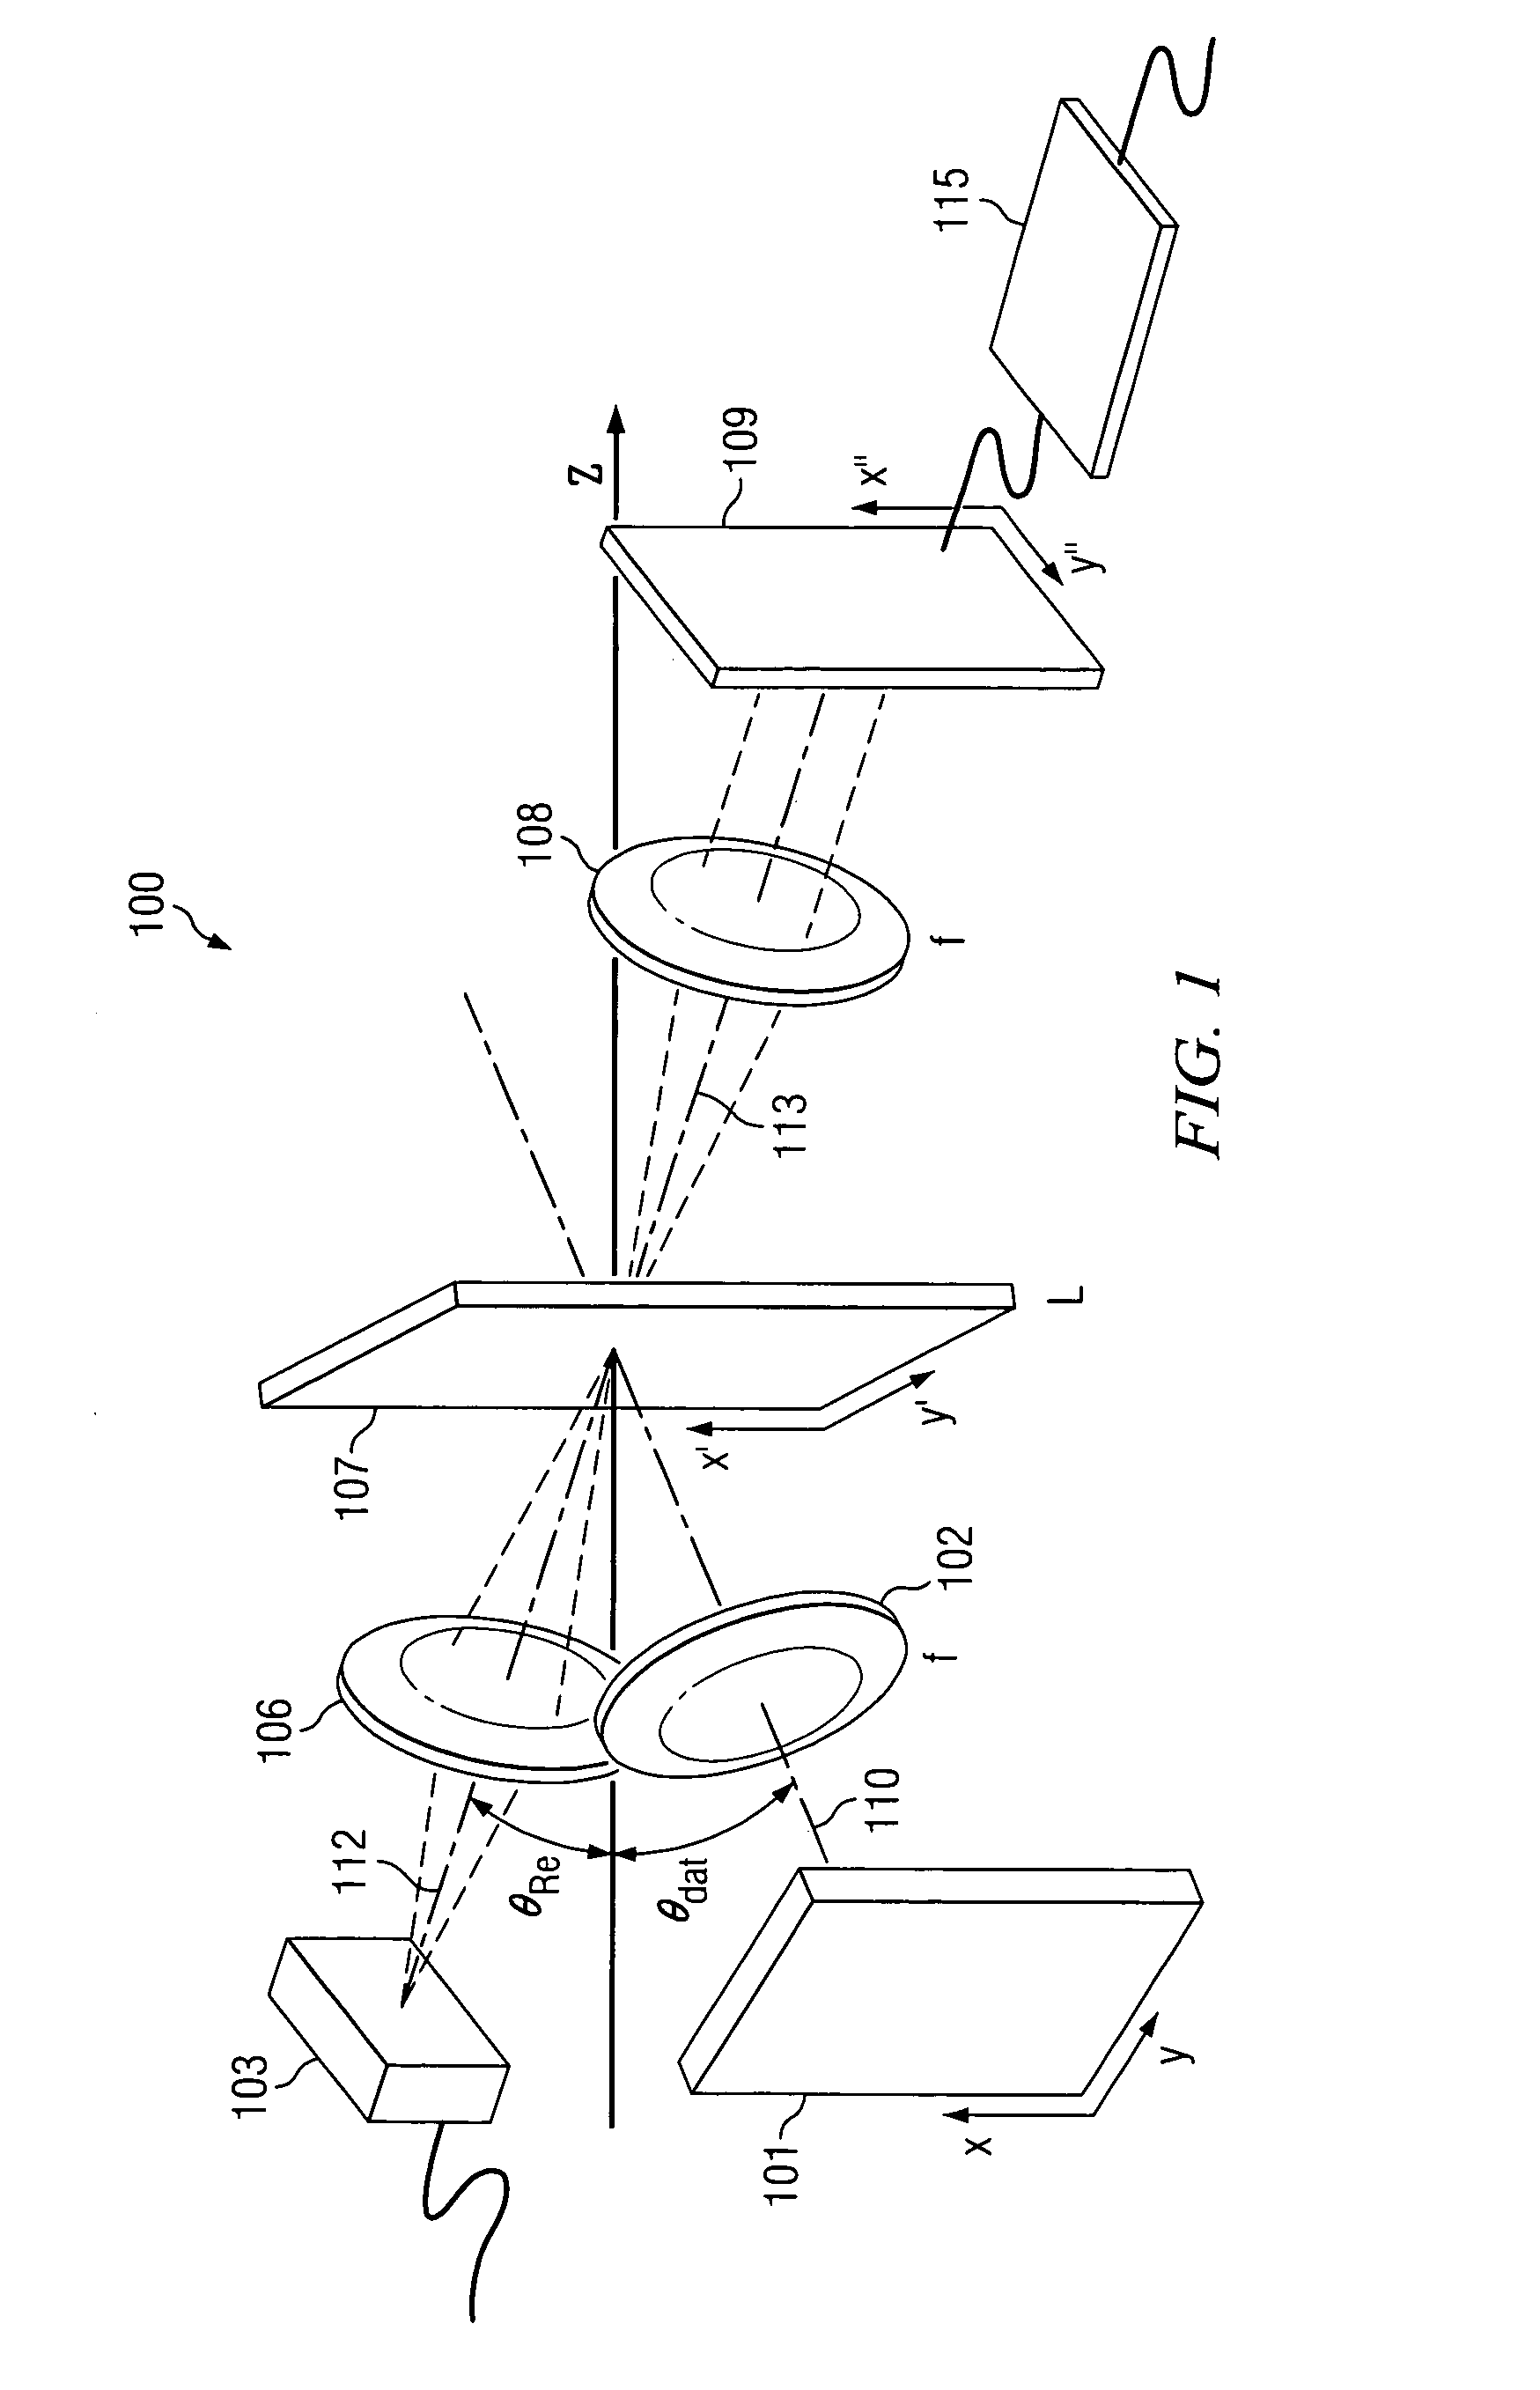 Content organization and storage method for storing holographic search database